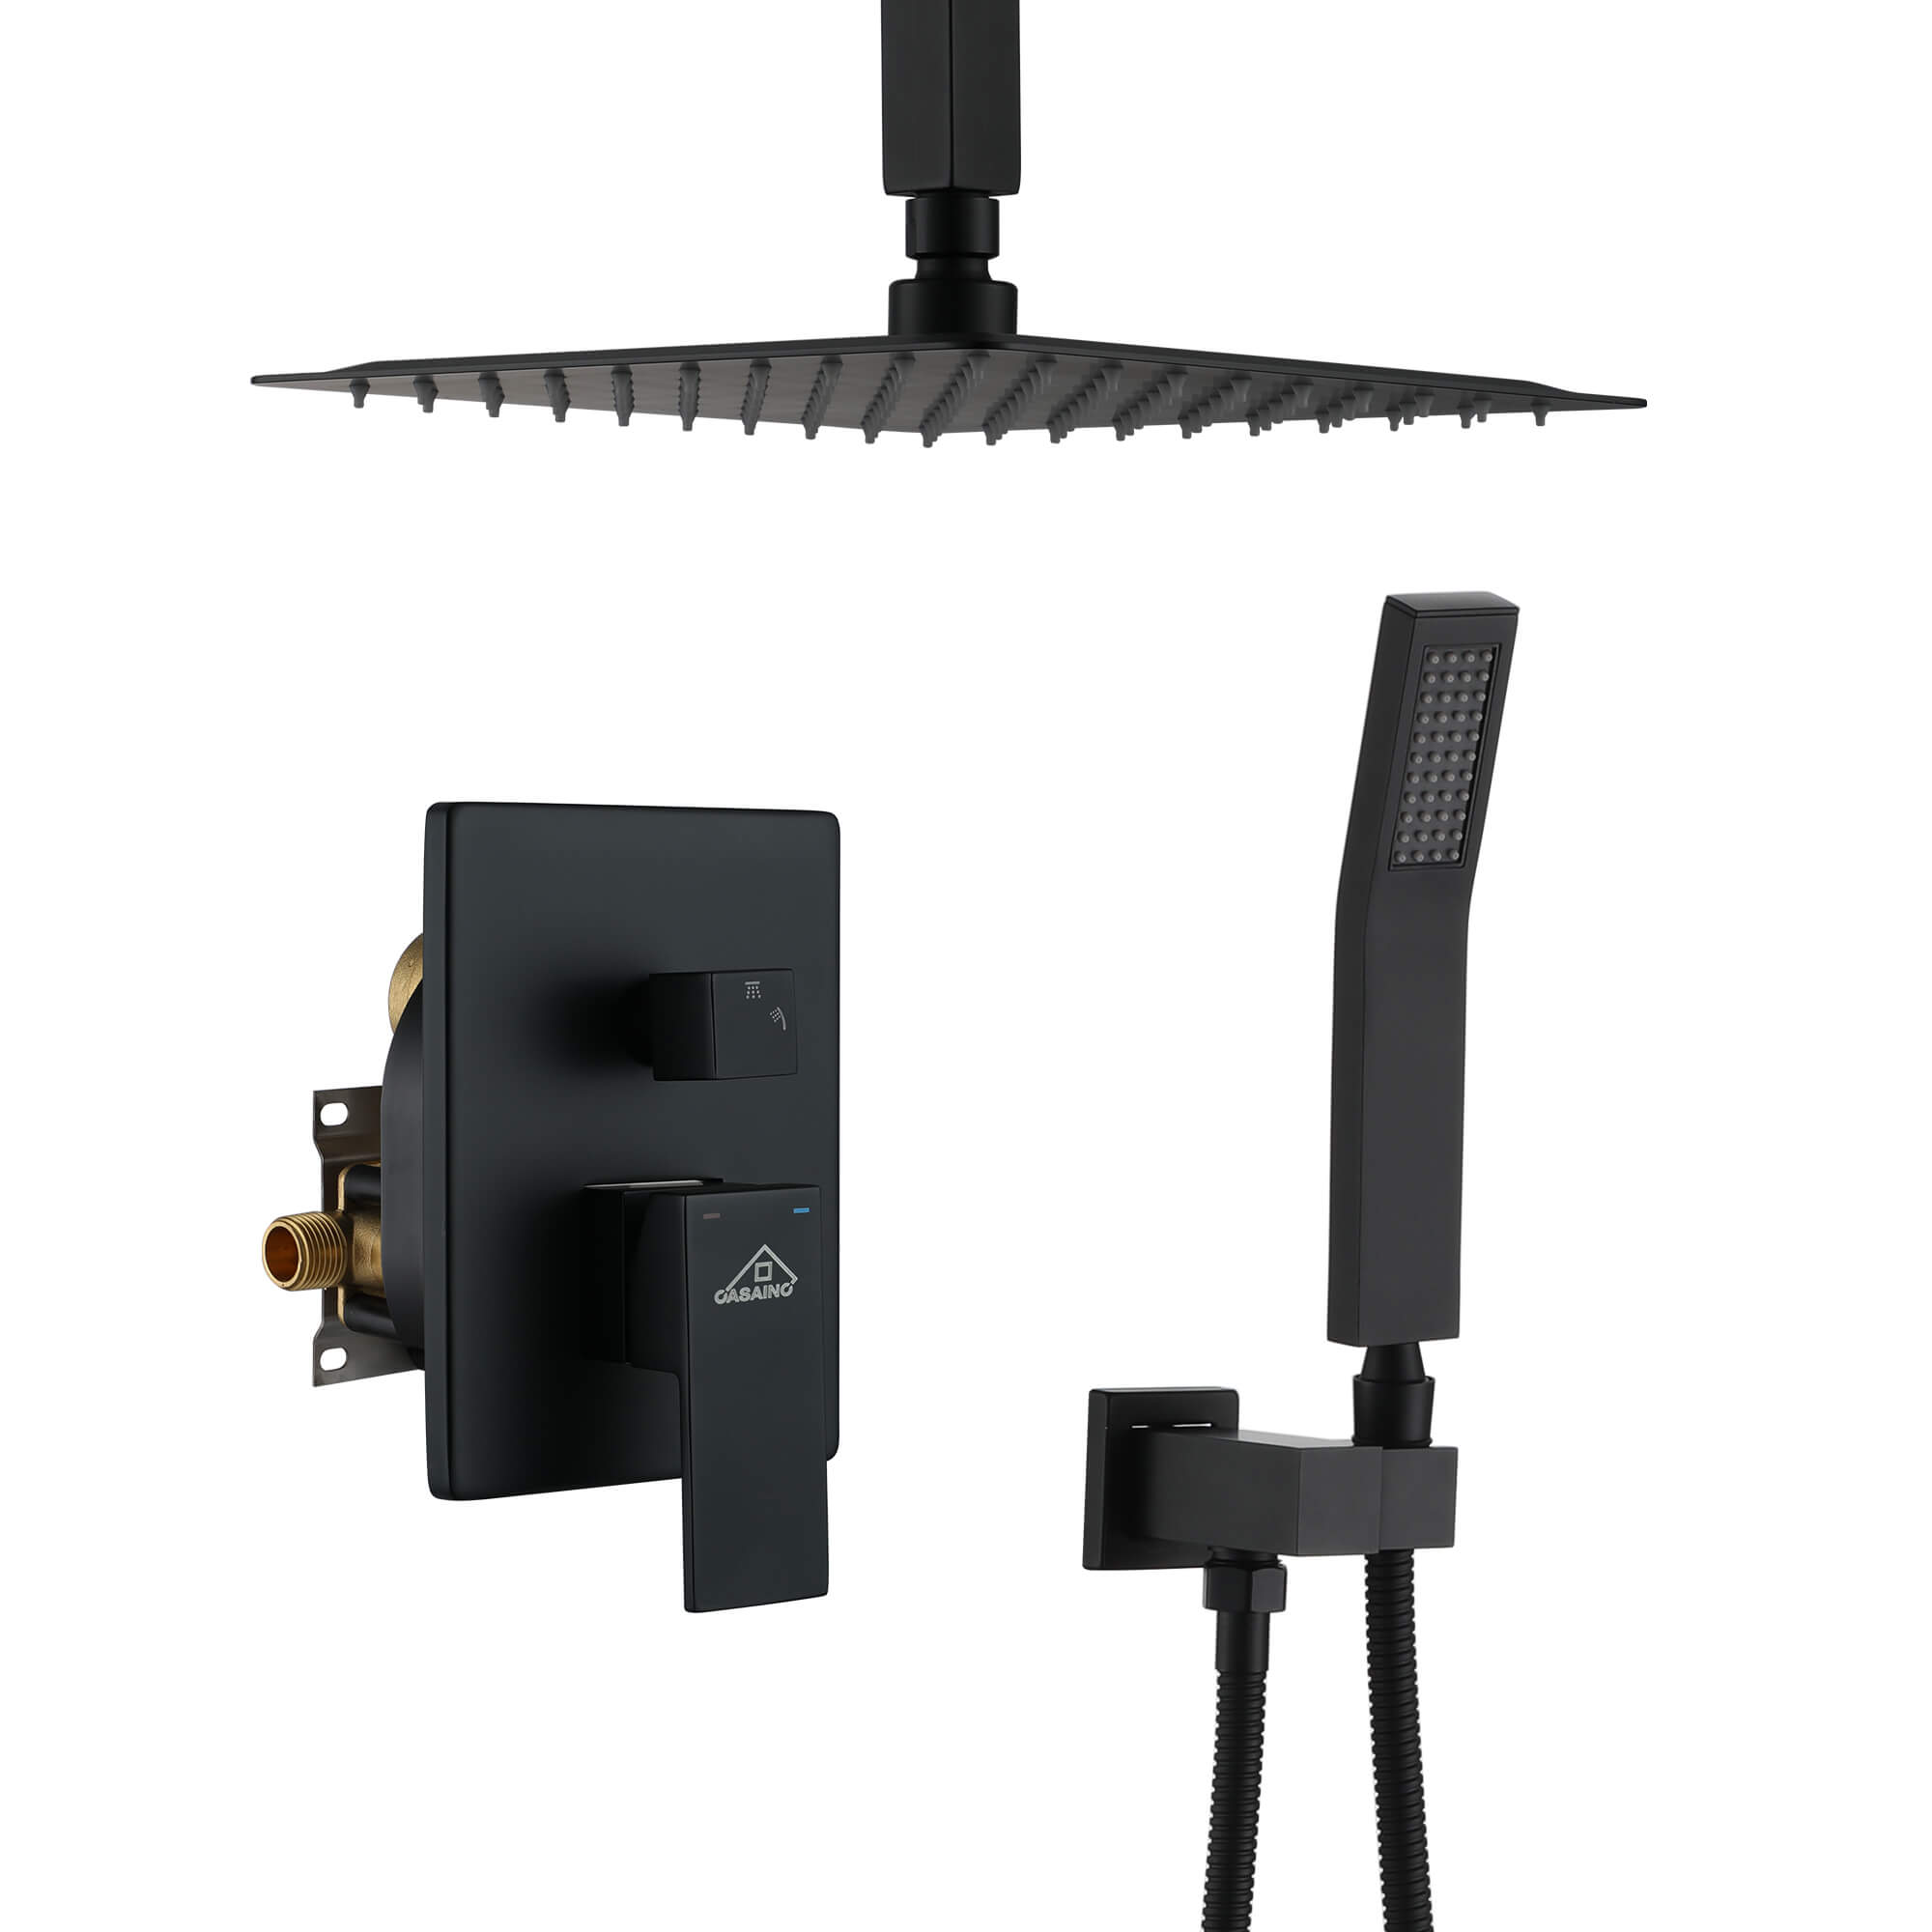 CASAINC Wall-Mounted/Ceiling-Mounted 2-Function Shower System with Handheld Shower in Matte Black